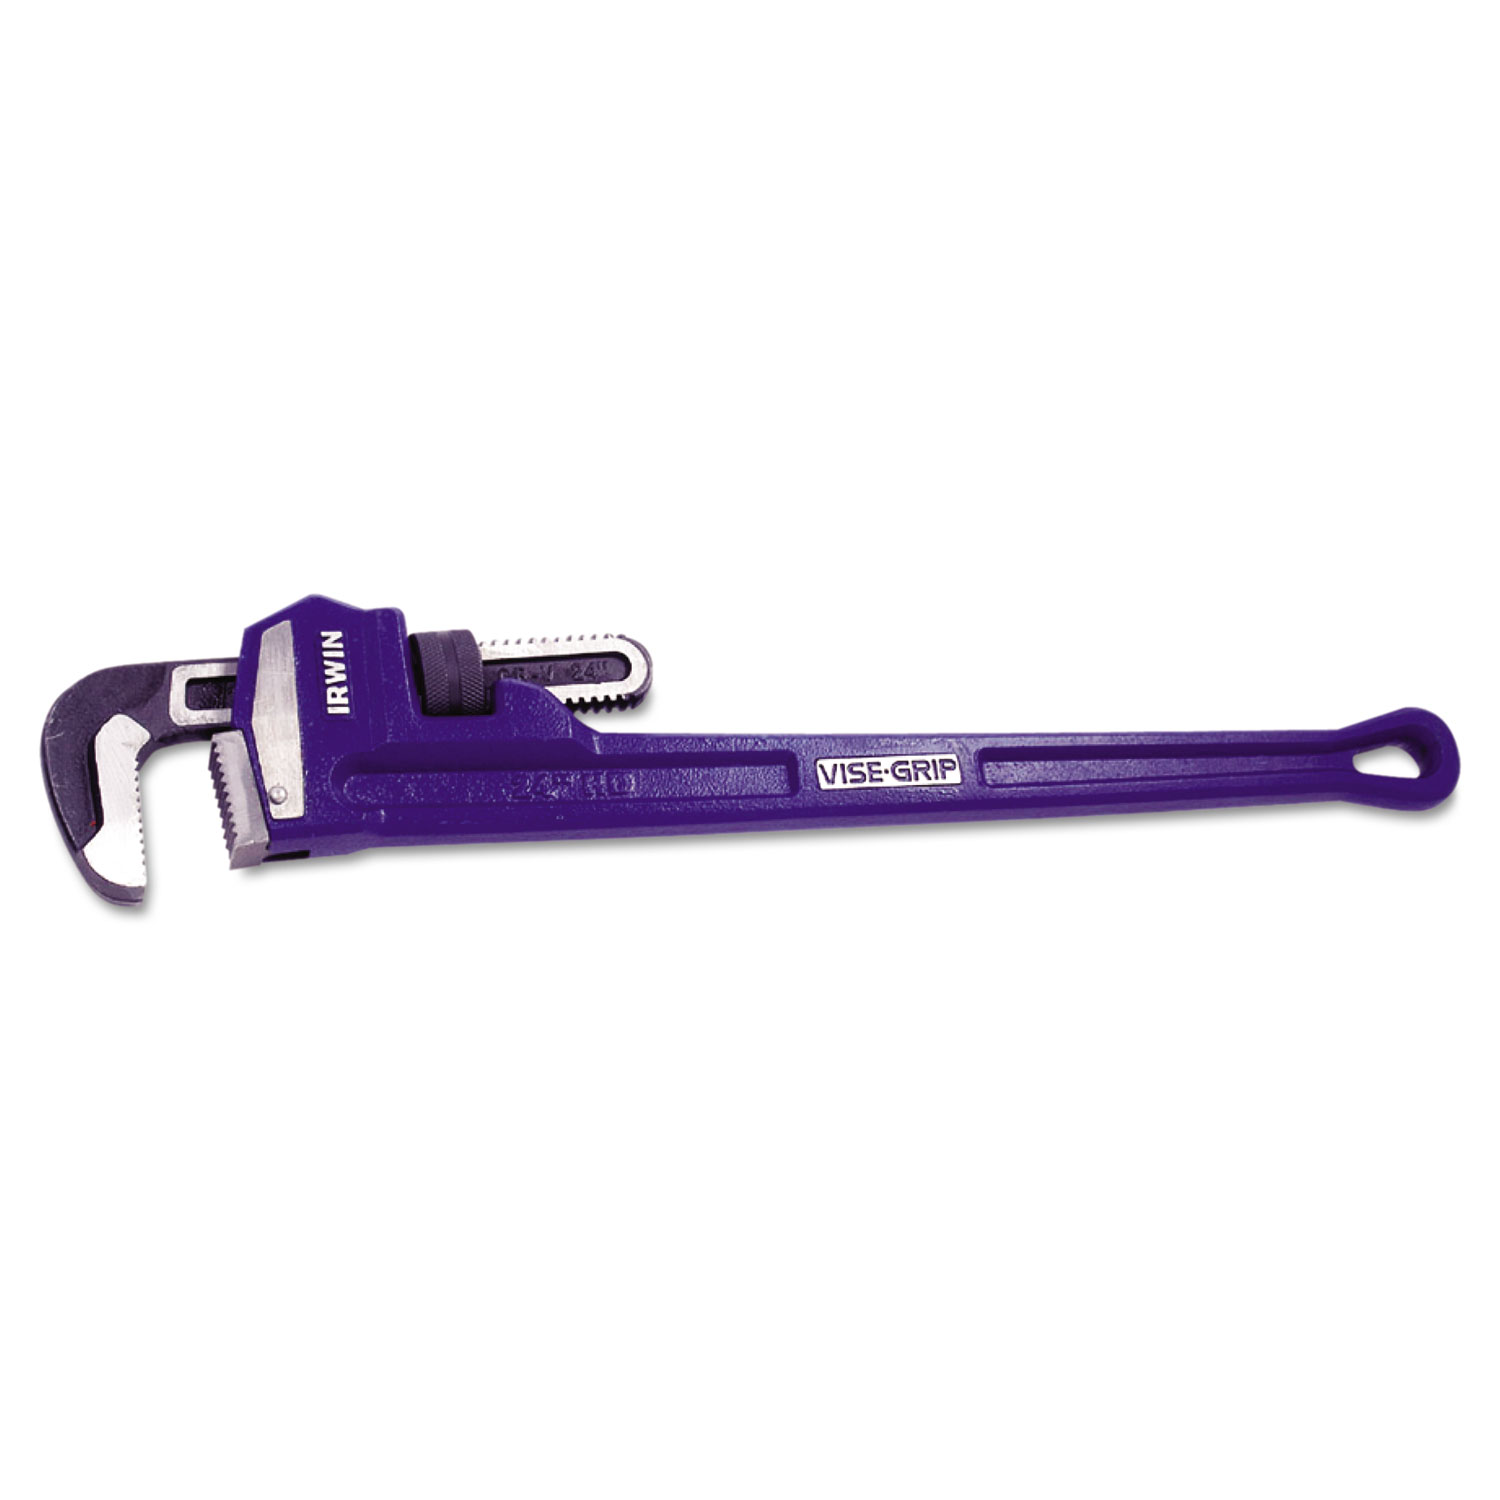 IRWIN VISE-GRIP Cast Iron Pipe Wrench, 36